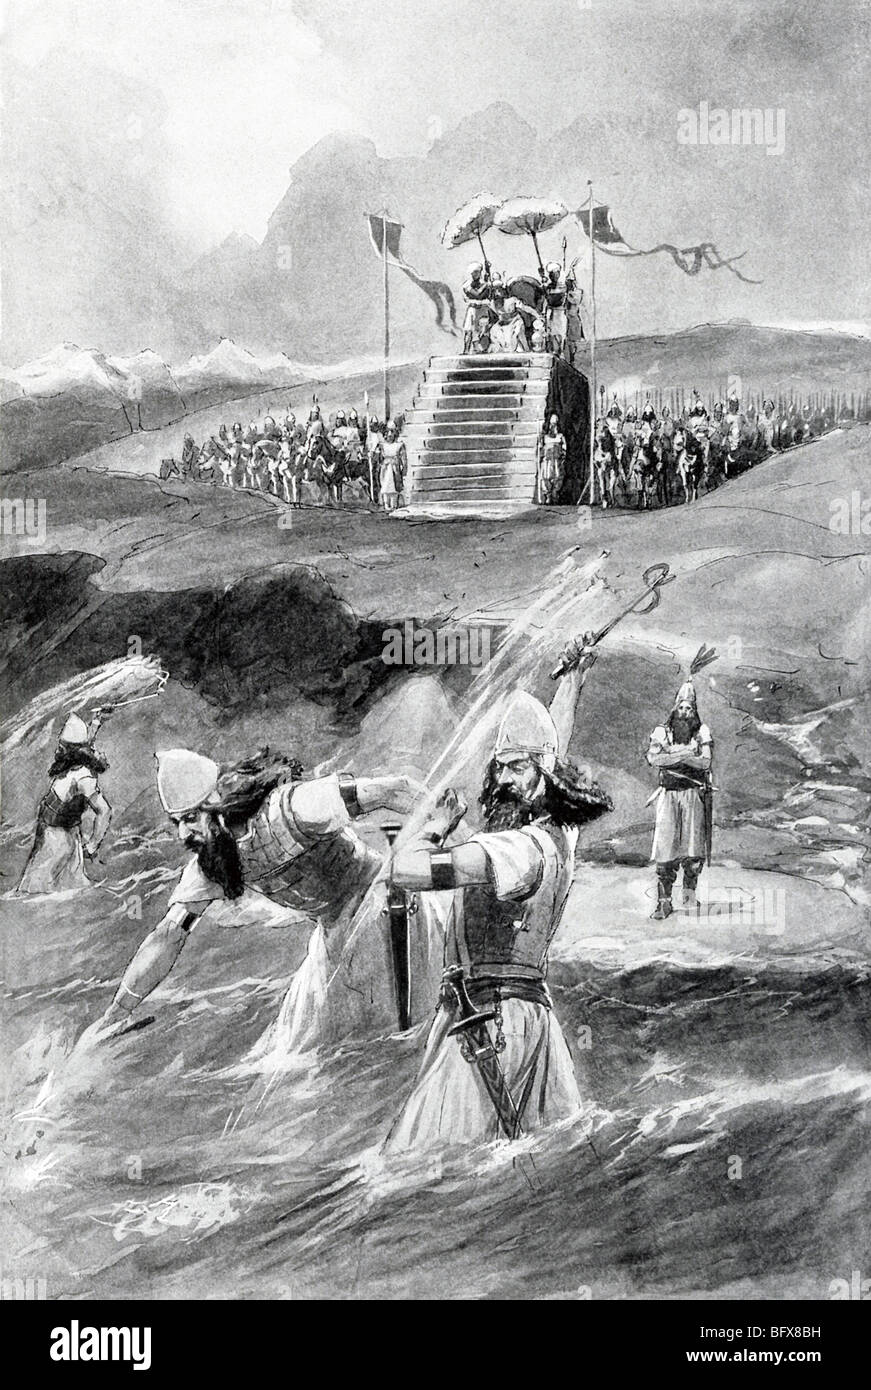 When a storm destroyed the bridge Xerxes of Persia had built across the Hellespont, he ordered his men to whip its waters. Stock Photo